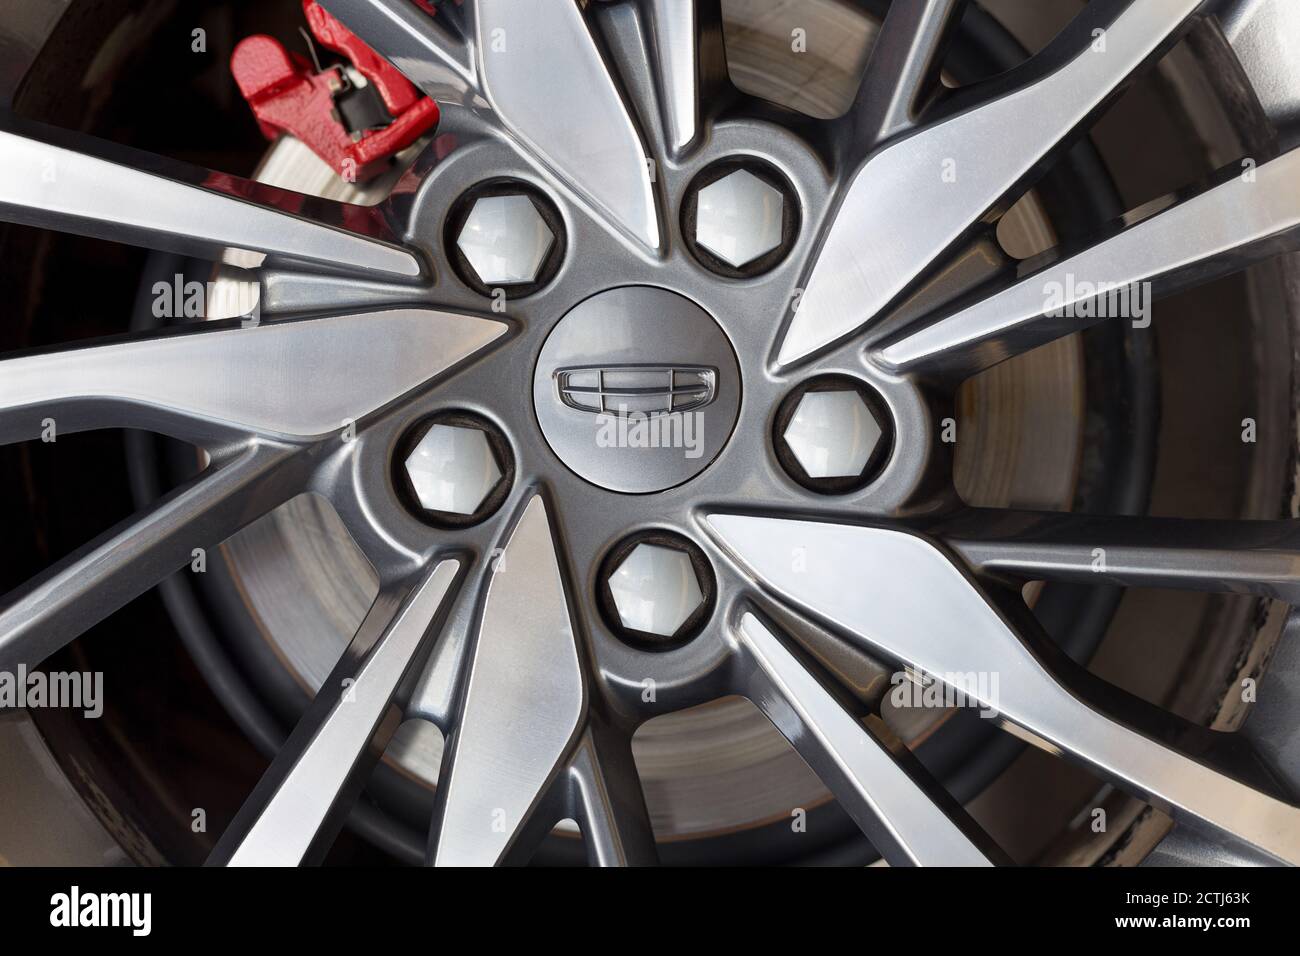 Russia, Izhevsk - August 14, 2020: Geely showroom. The alloy wheel of a new CoolRay car. Cropped image. Car manufacturer from China. Stock Photo